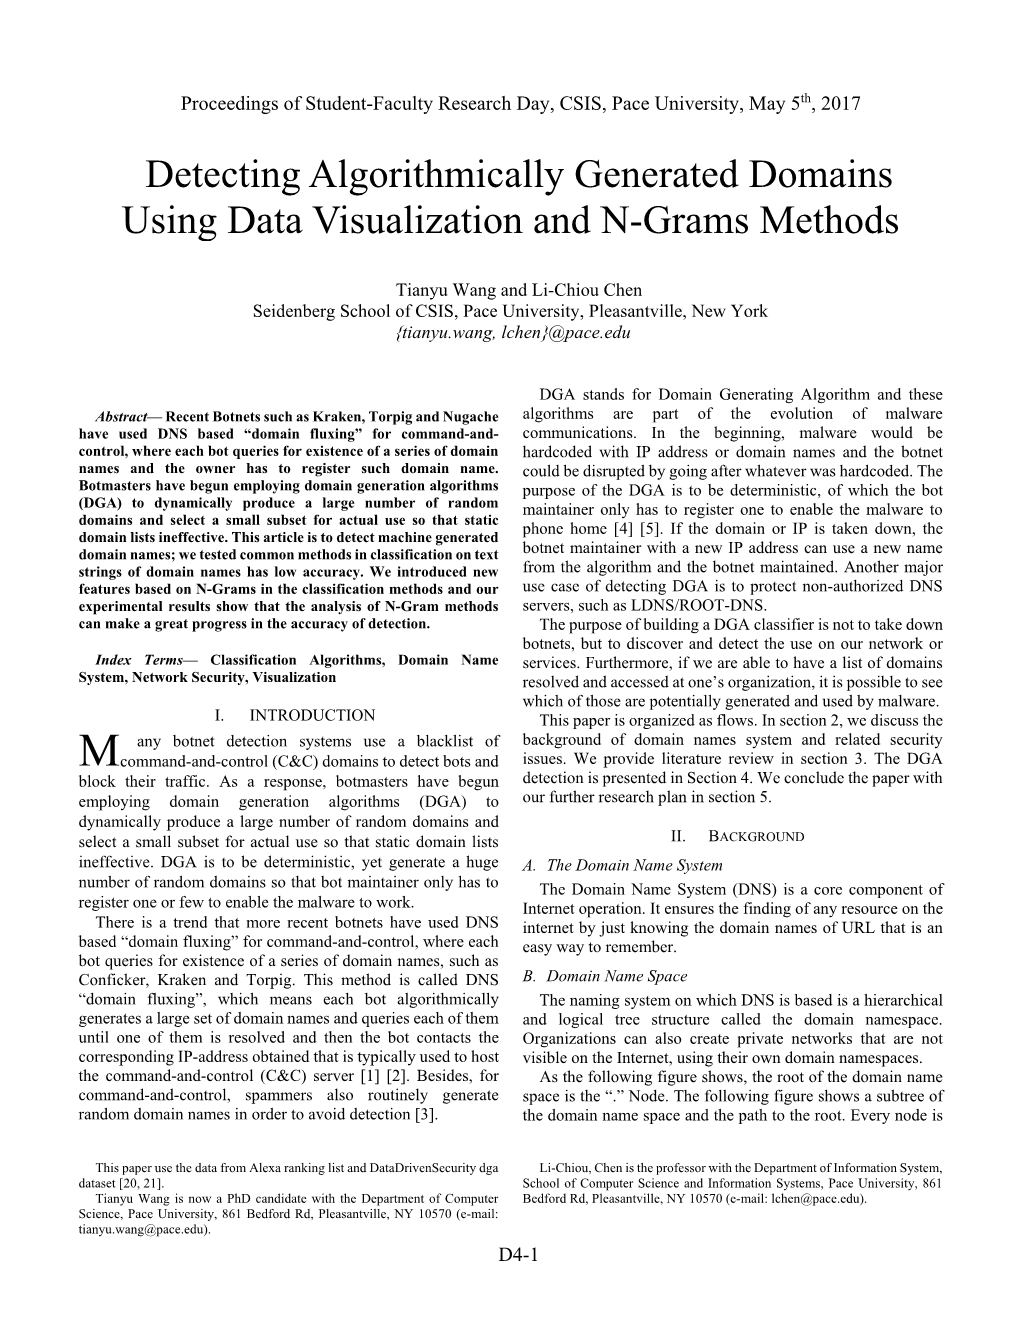 Detecting Algorithmically Generated Domains Using Data Visualization and N-Grams Methods